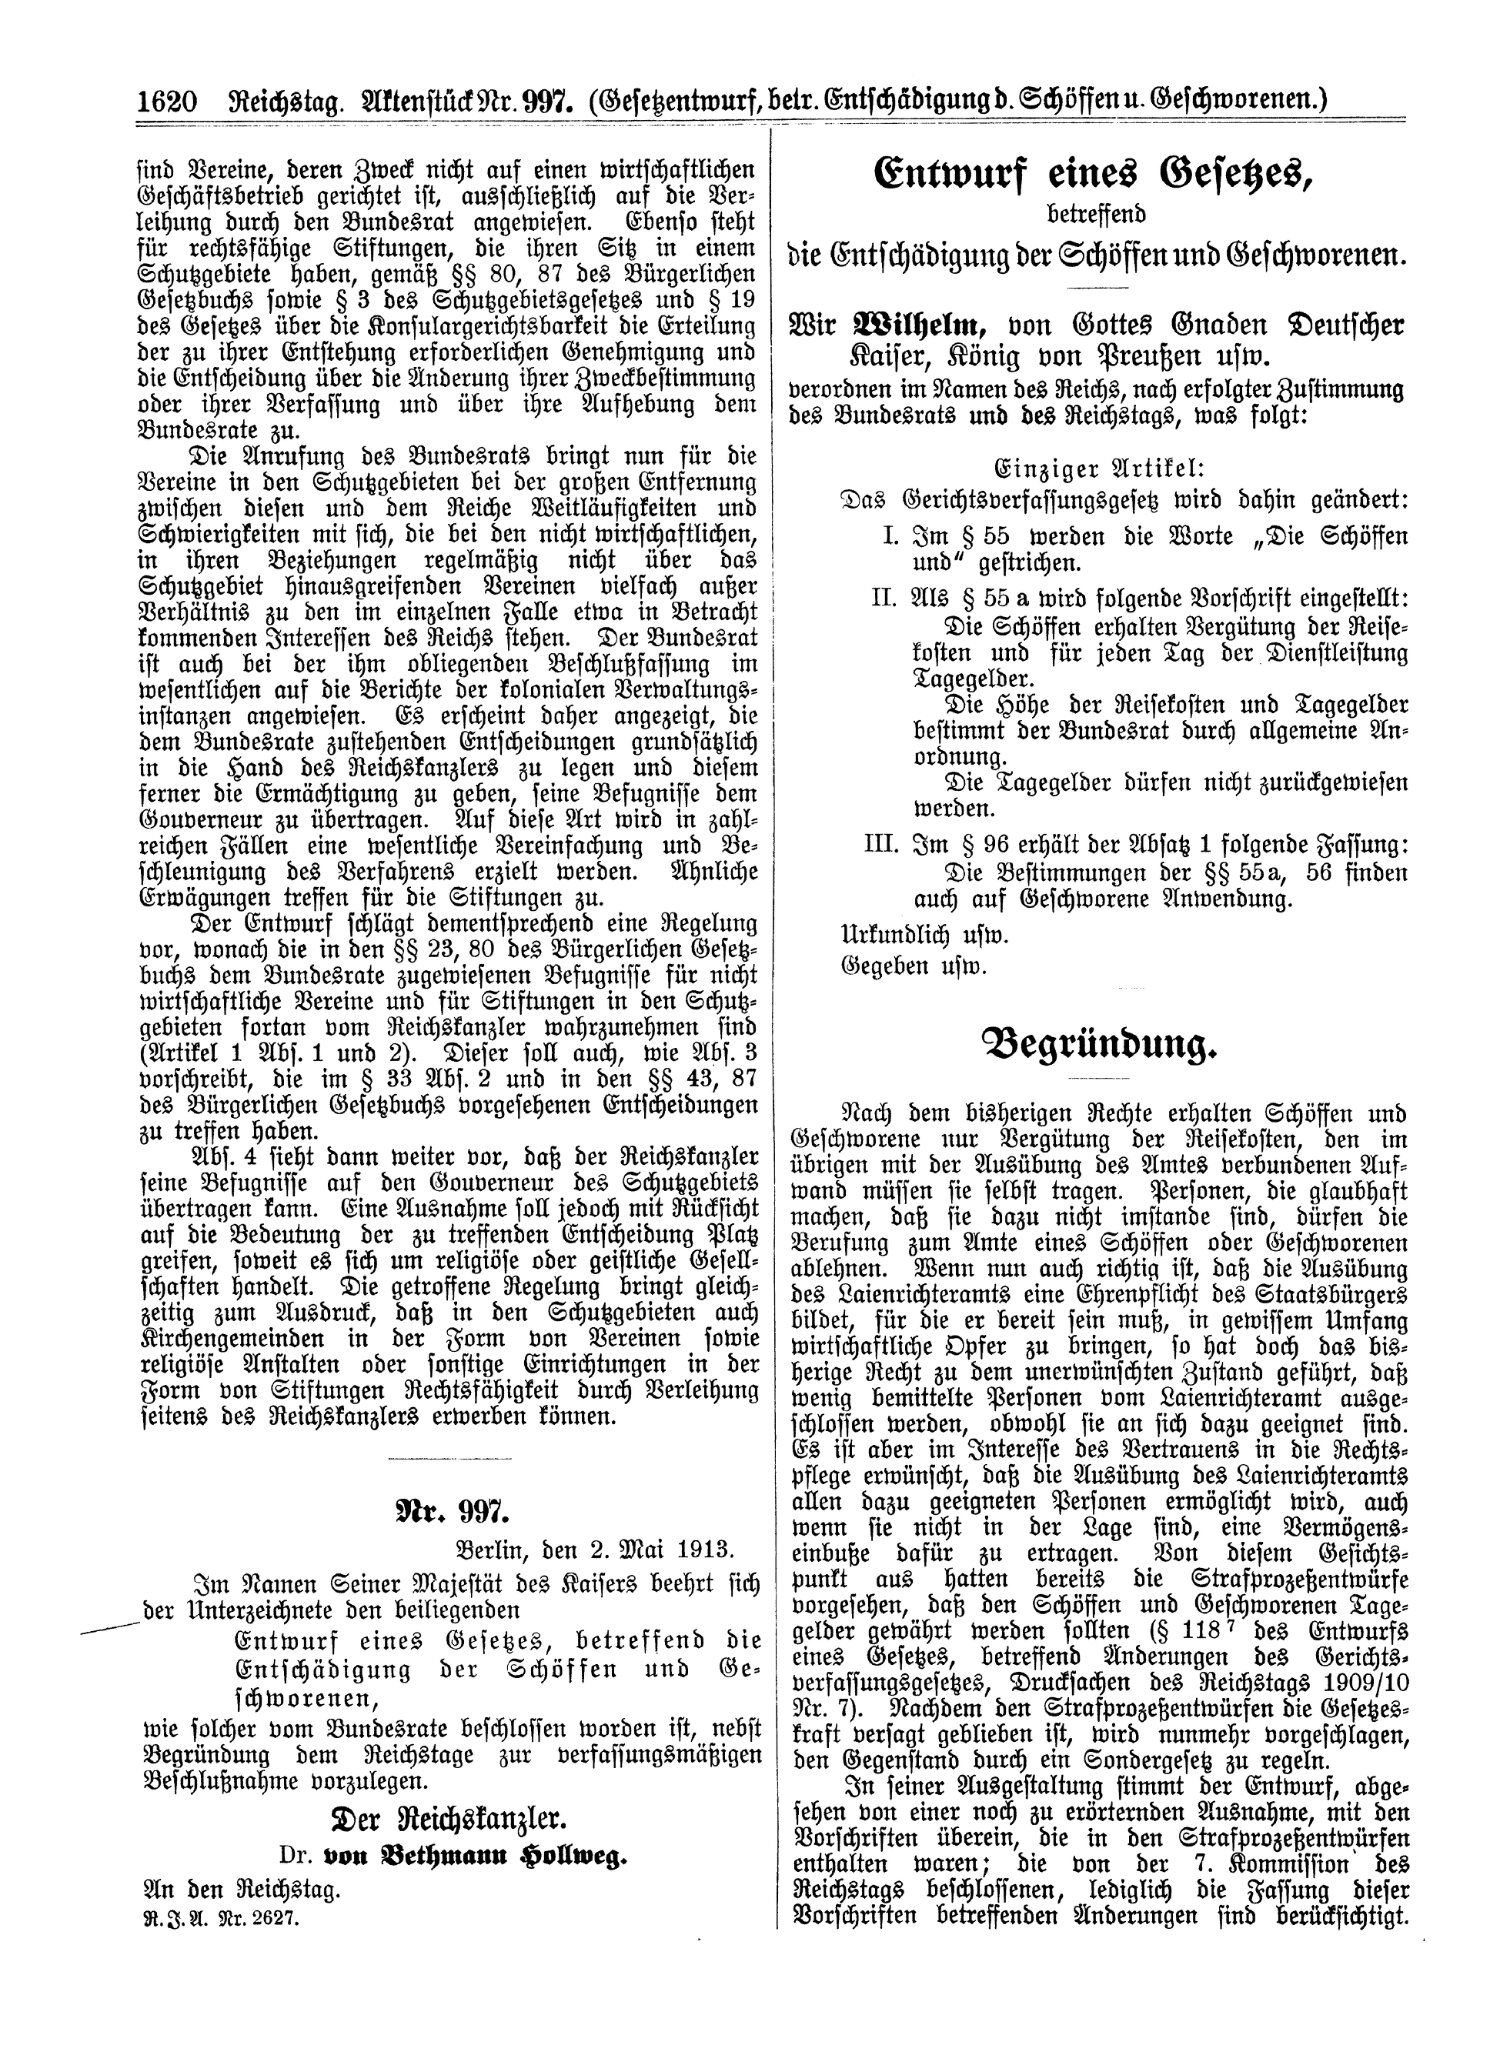 Scan of page 1620